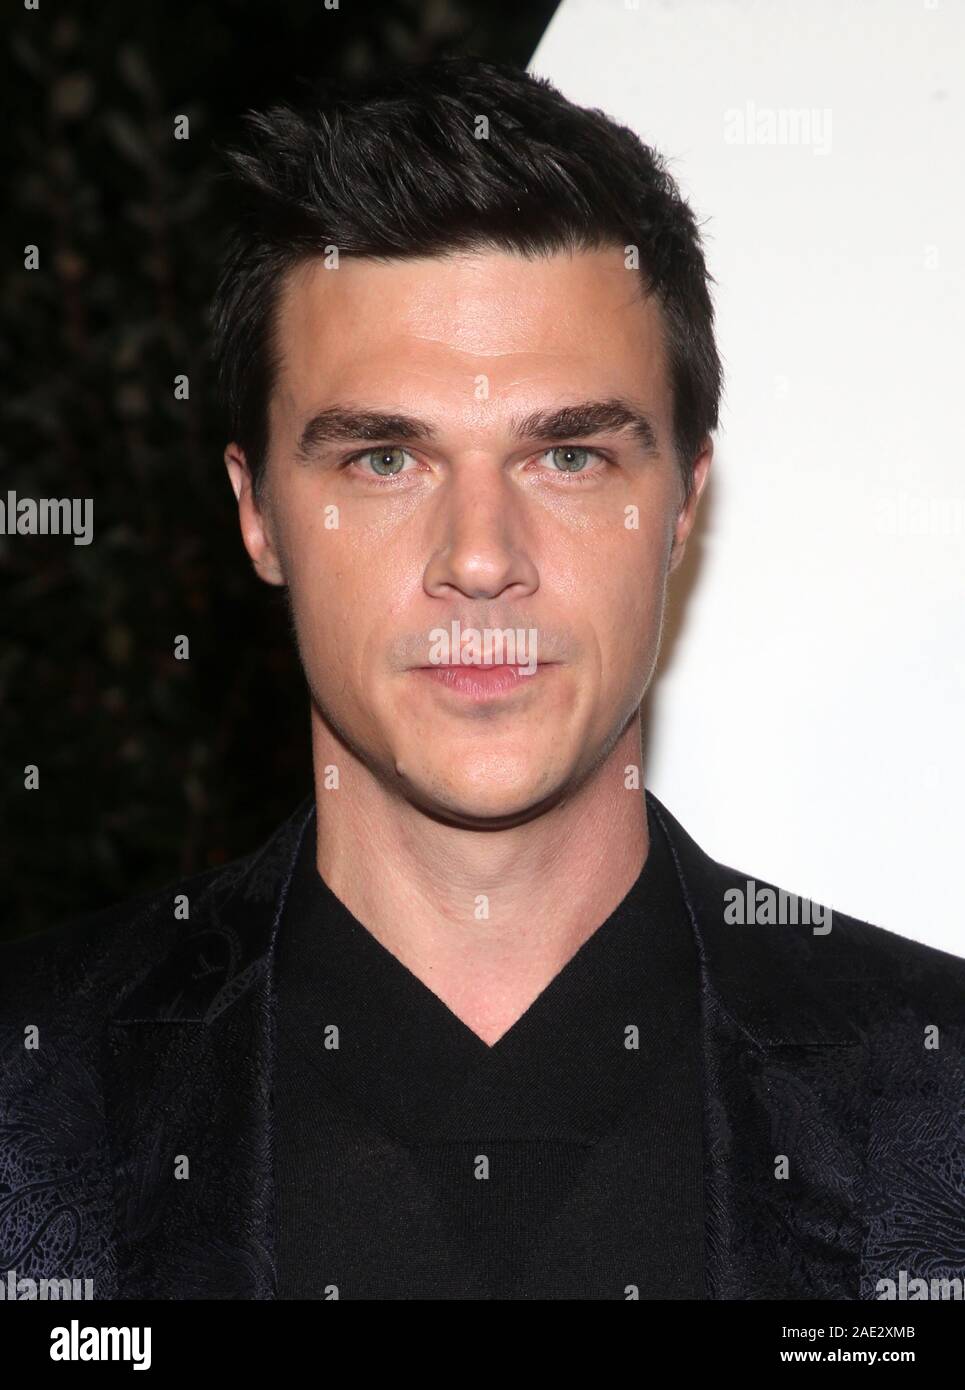 California, USA. 05th Dec, 2019. Finn Wittrock, at 2019 GQ Men Of The Year Celebration at The West Hollywood EDITION in West Hollywood, California on December 5, 2019. Credit: MediaPunch Inc/Alamy Live News Stock Photo